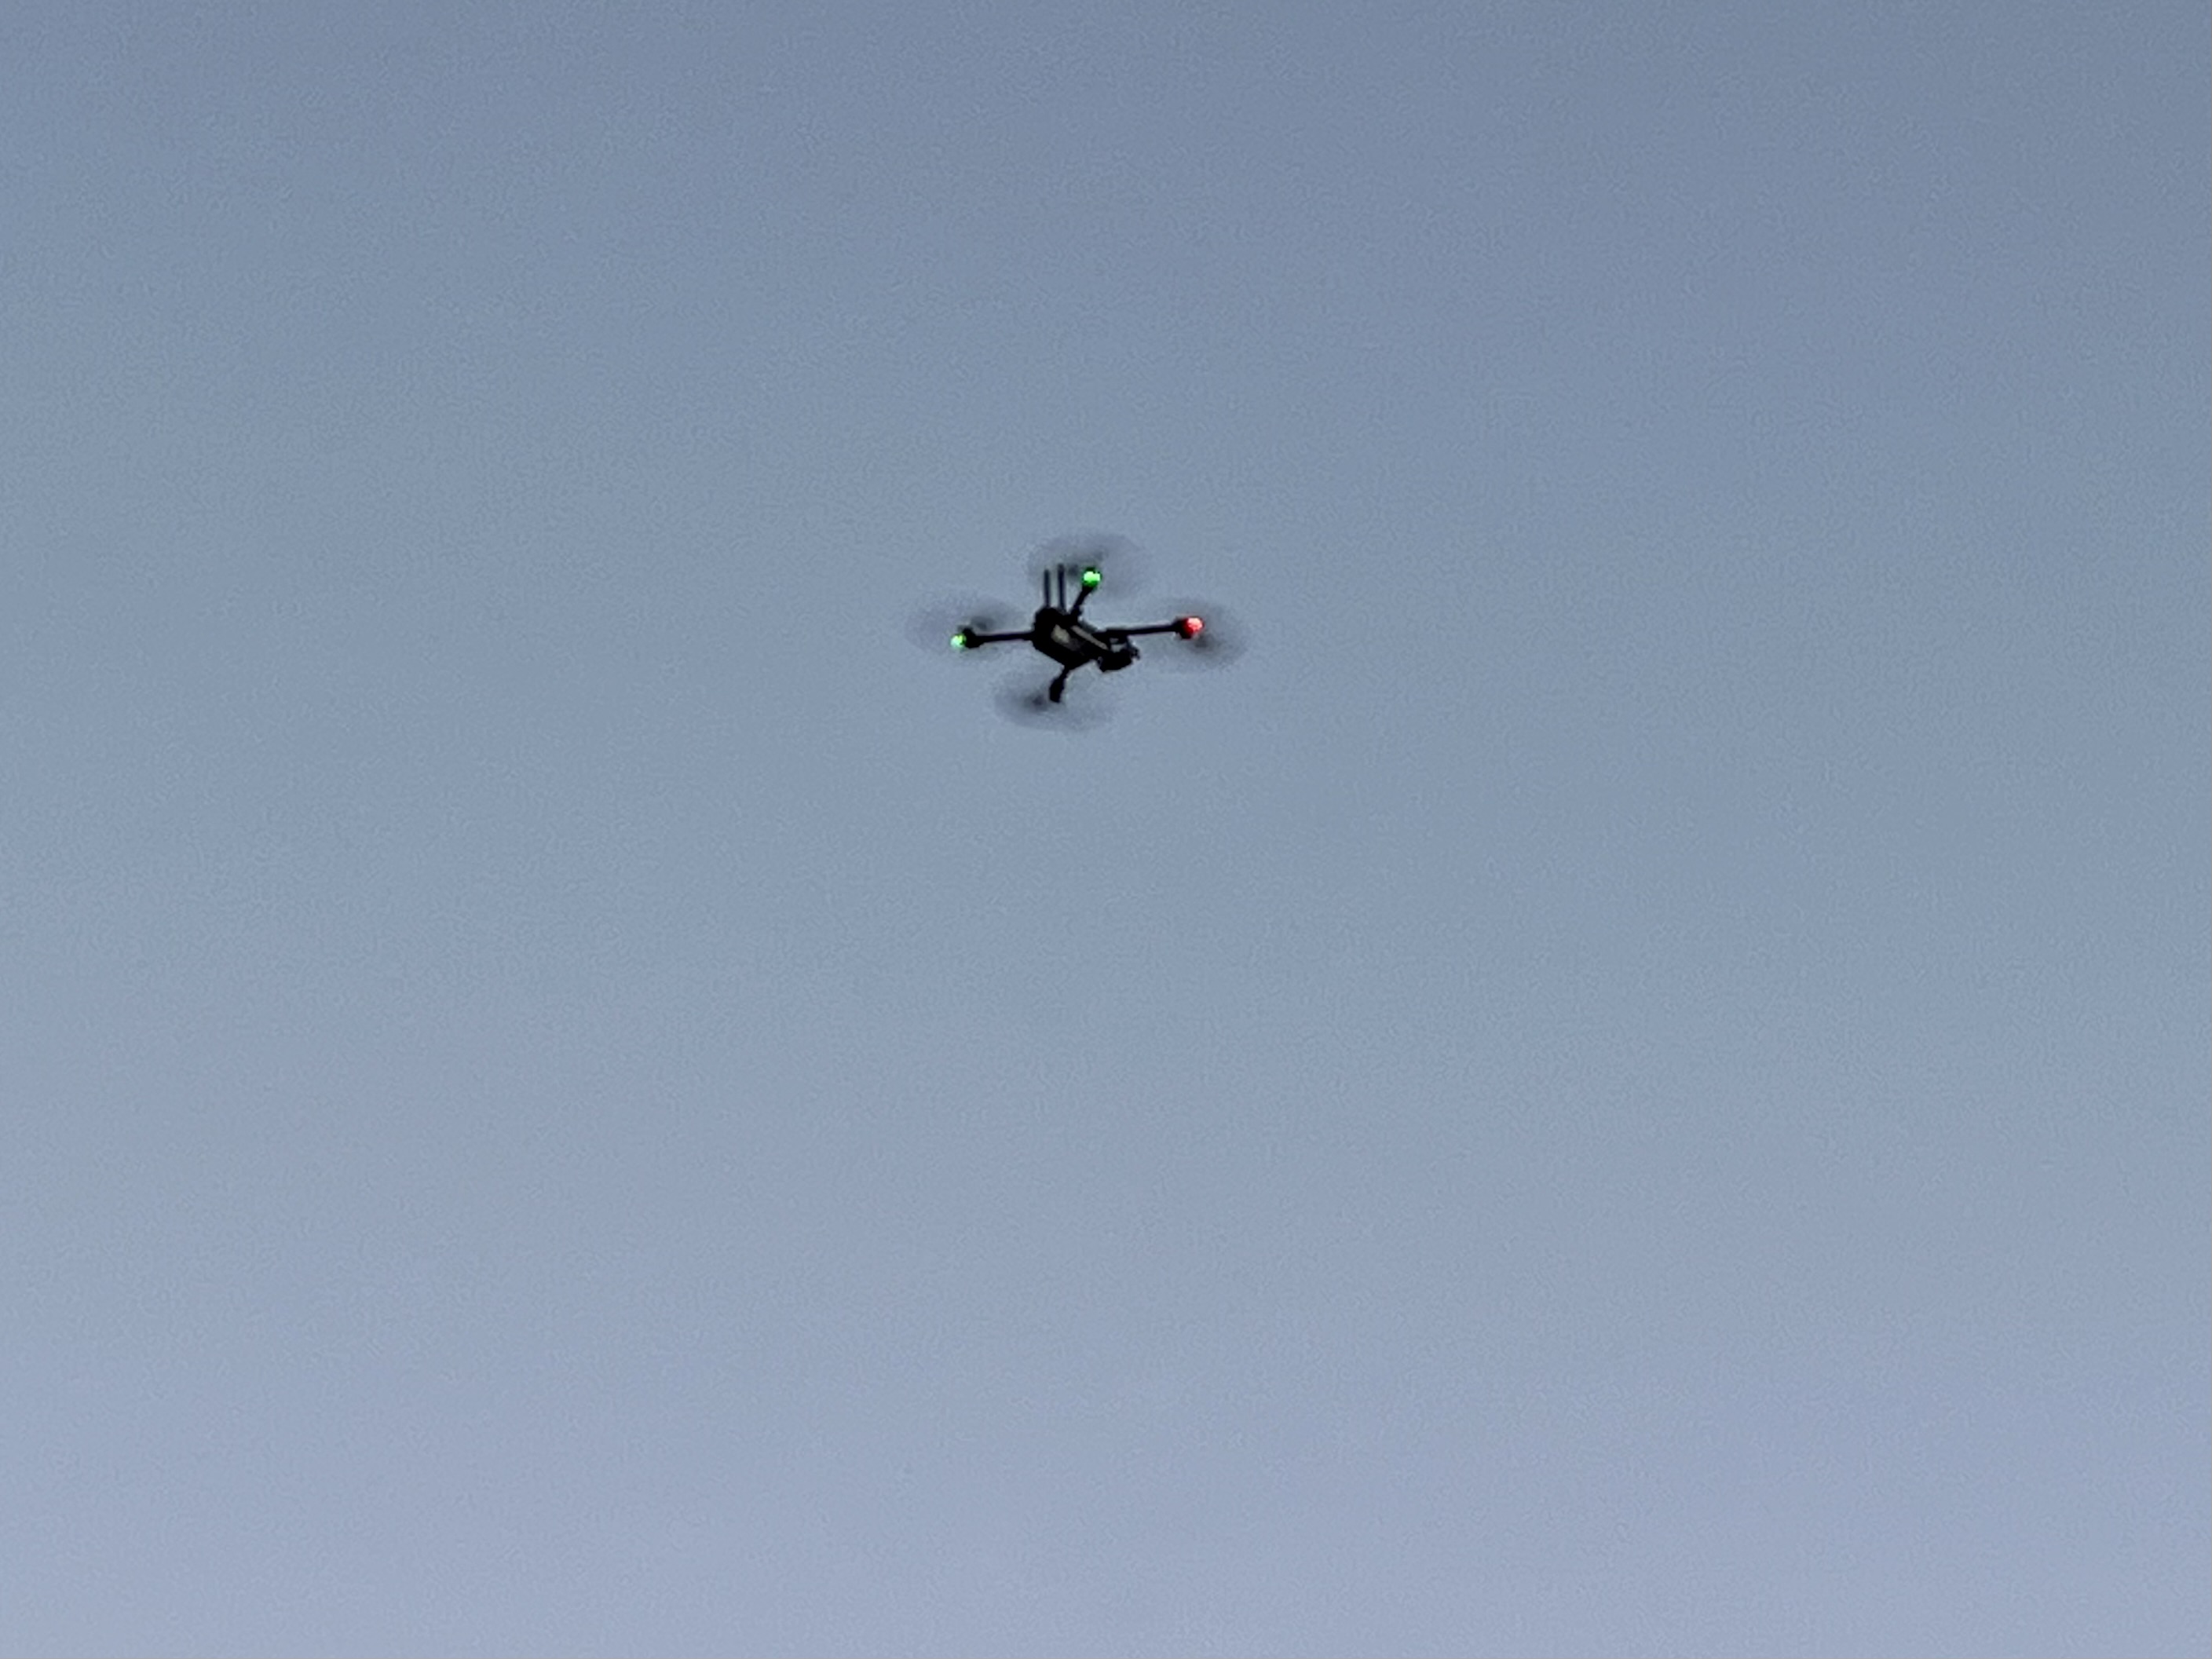 An FCSO drone in the sky